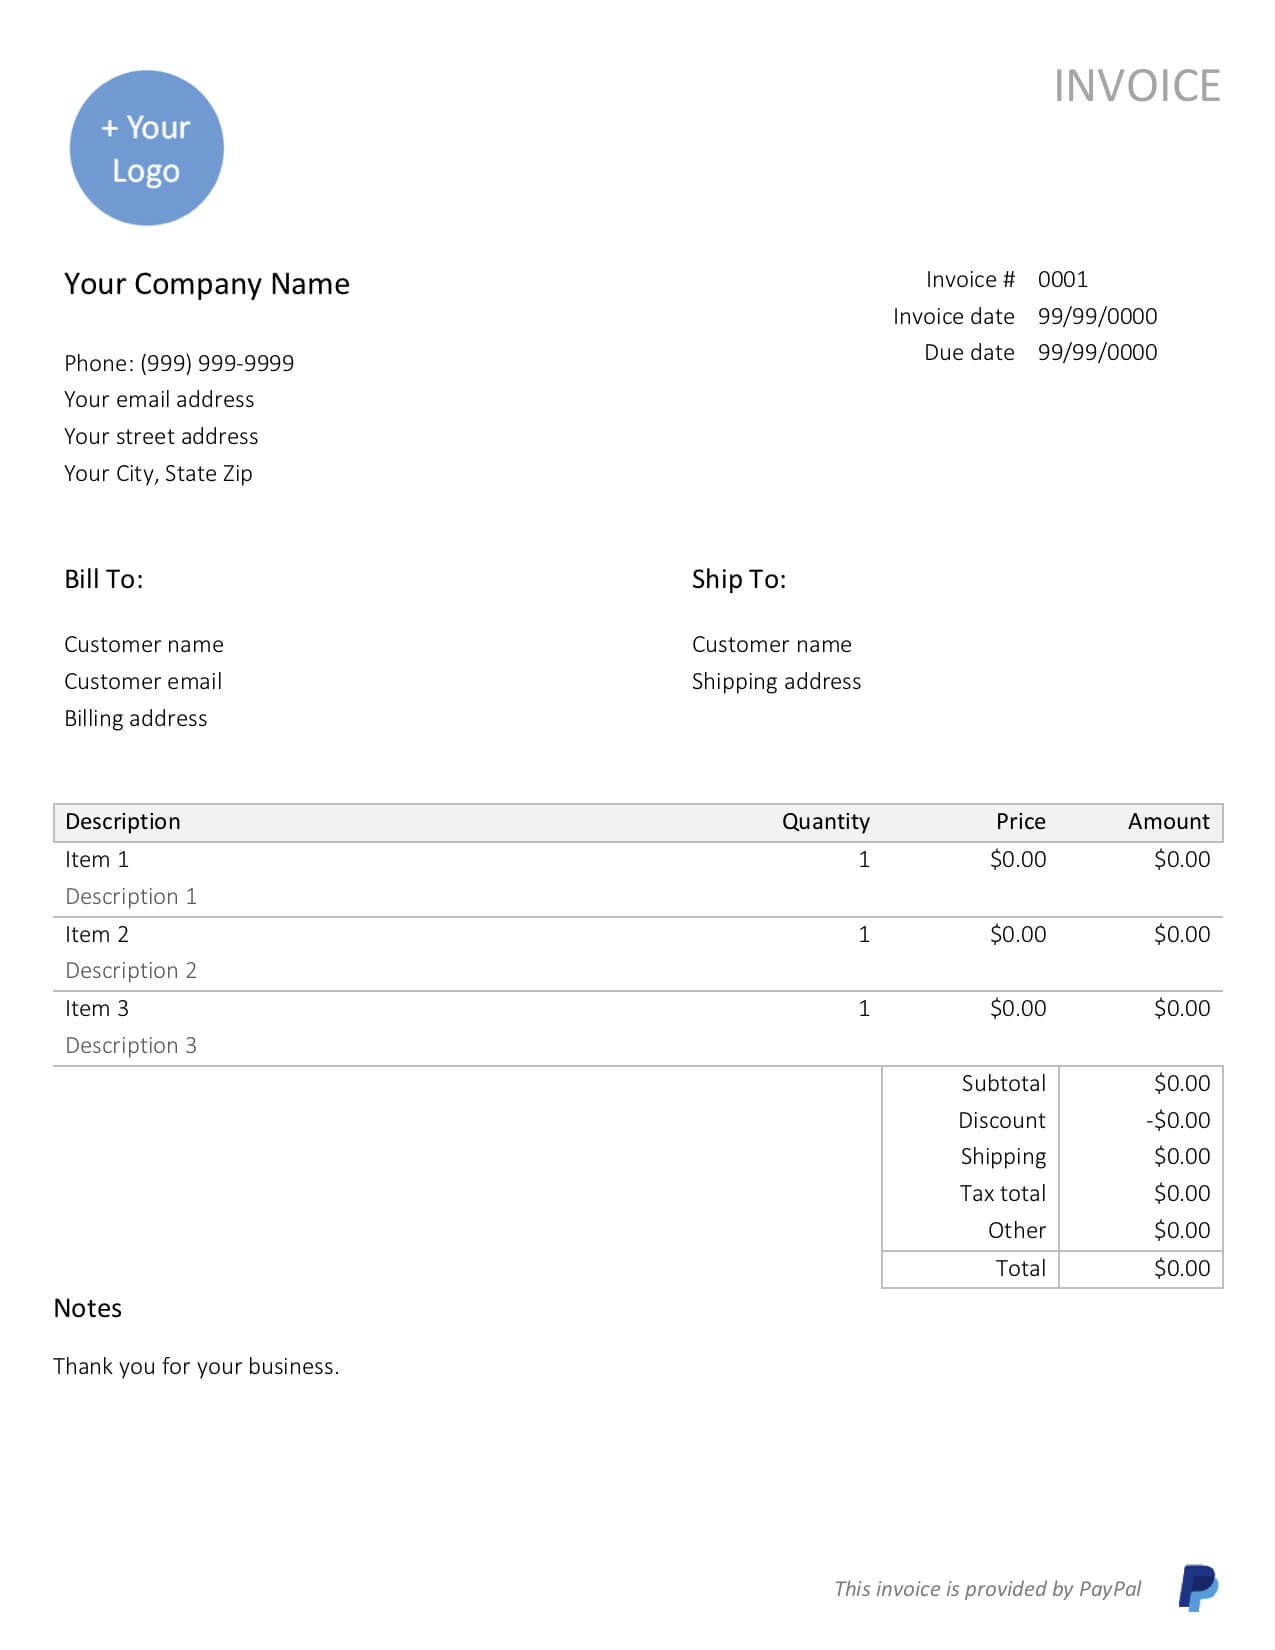 Free, Downloadable Sample Invoice Template | Paypal With Credit Card Bill Template